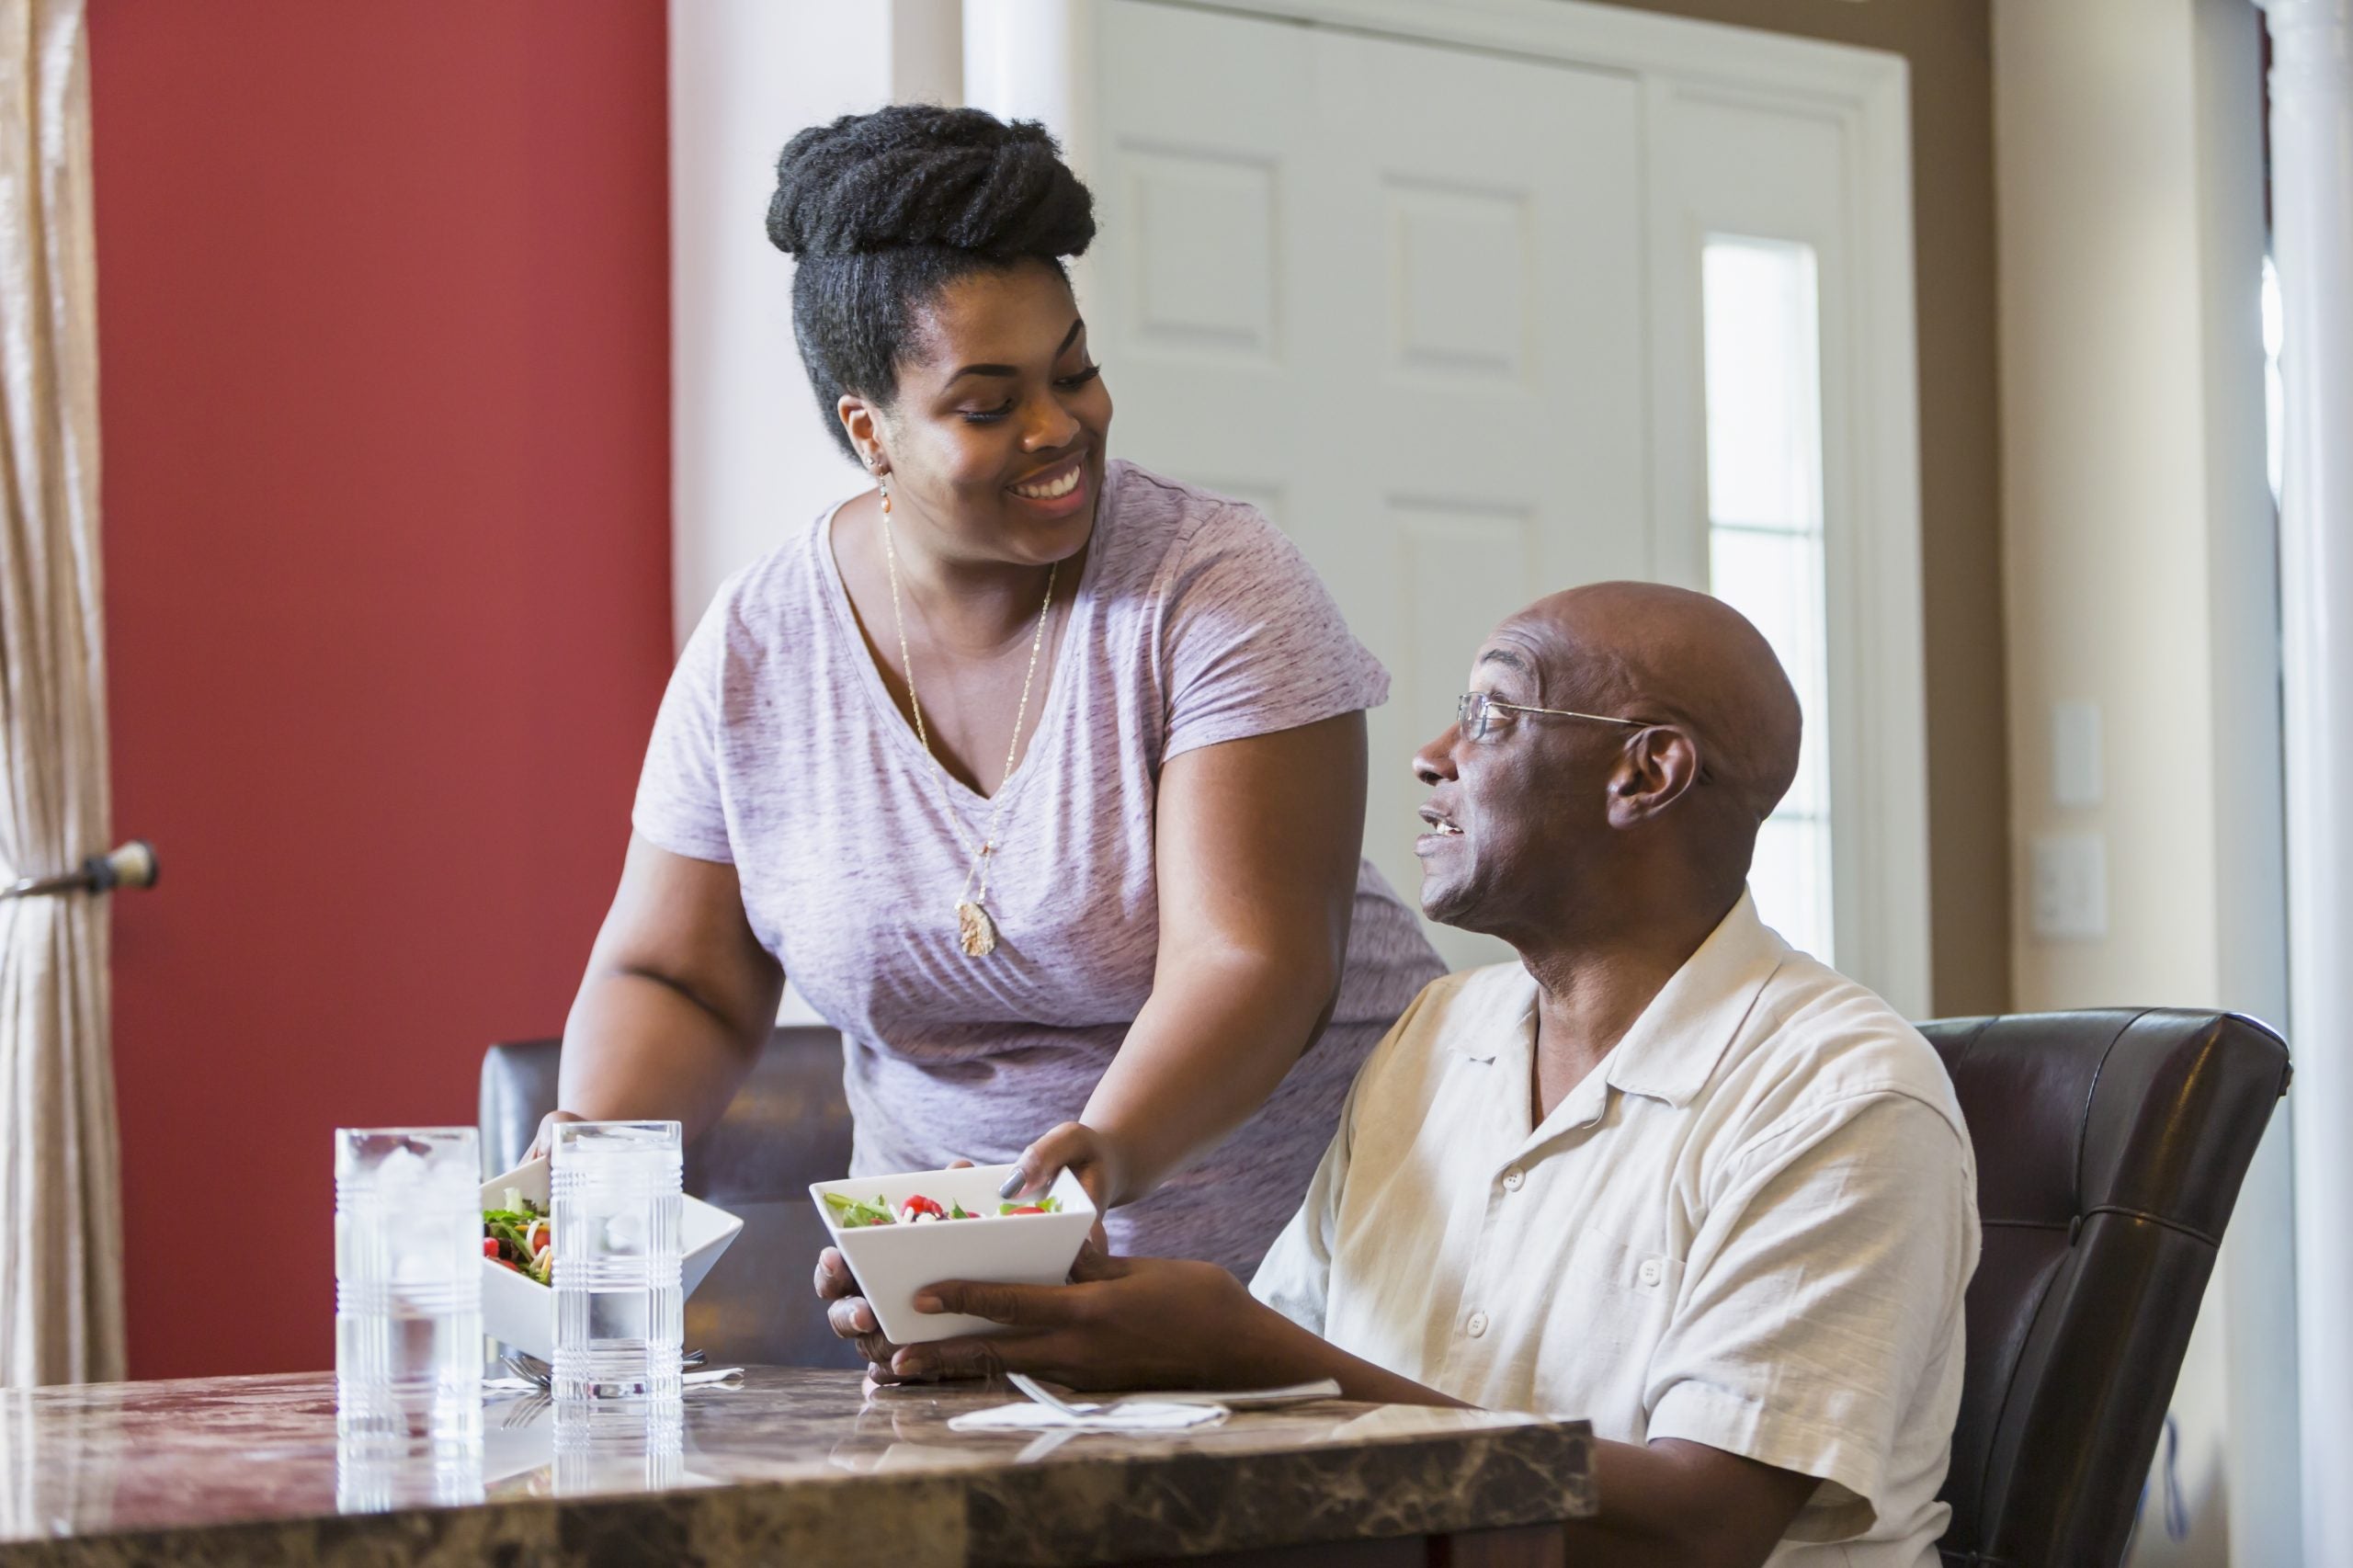 Family Matters: 6 Tips For Caring For Aging Or Sick Loved Ones